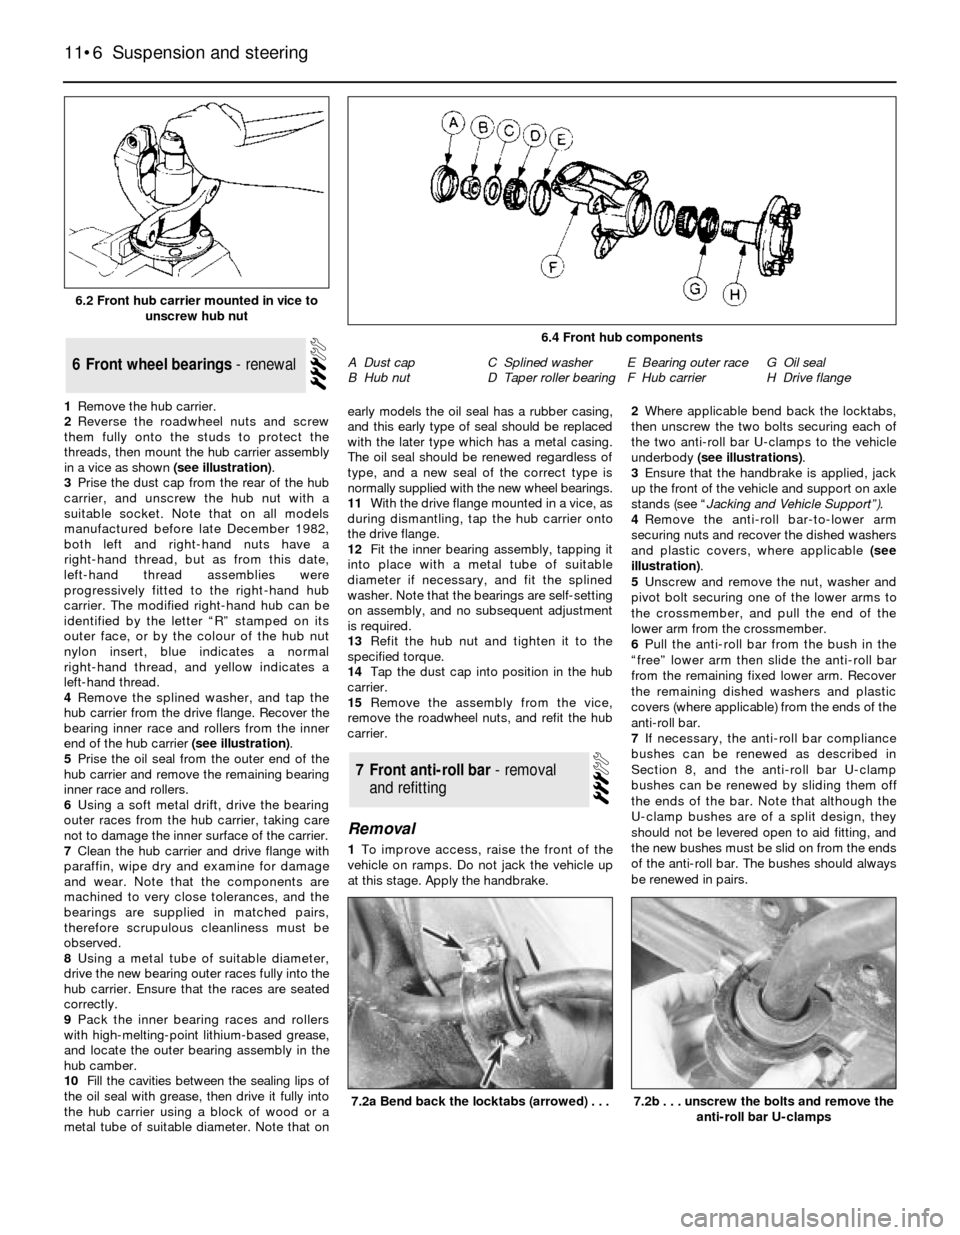 FORD SIERRA 1985 1.G Suspension And Steering Workshop Manual 1Remove the hub carrier.
2Reverse the roadwheel nuts and screw
them fully onto the studs to protect the
threads, then mount the hub carrier assembly
in a vice as shown (see illustration).
3Prise the d